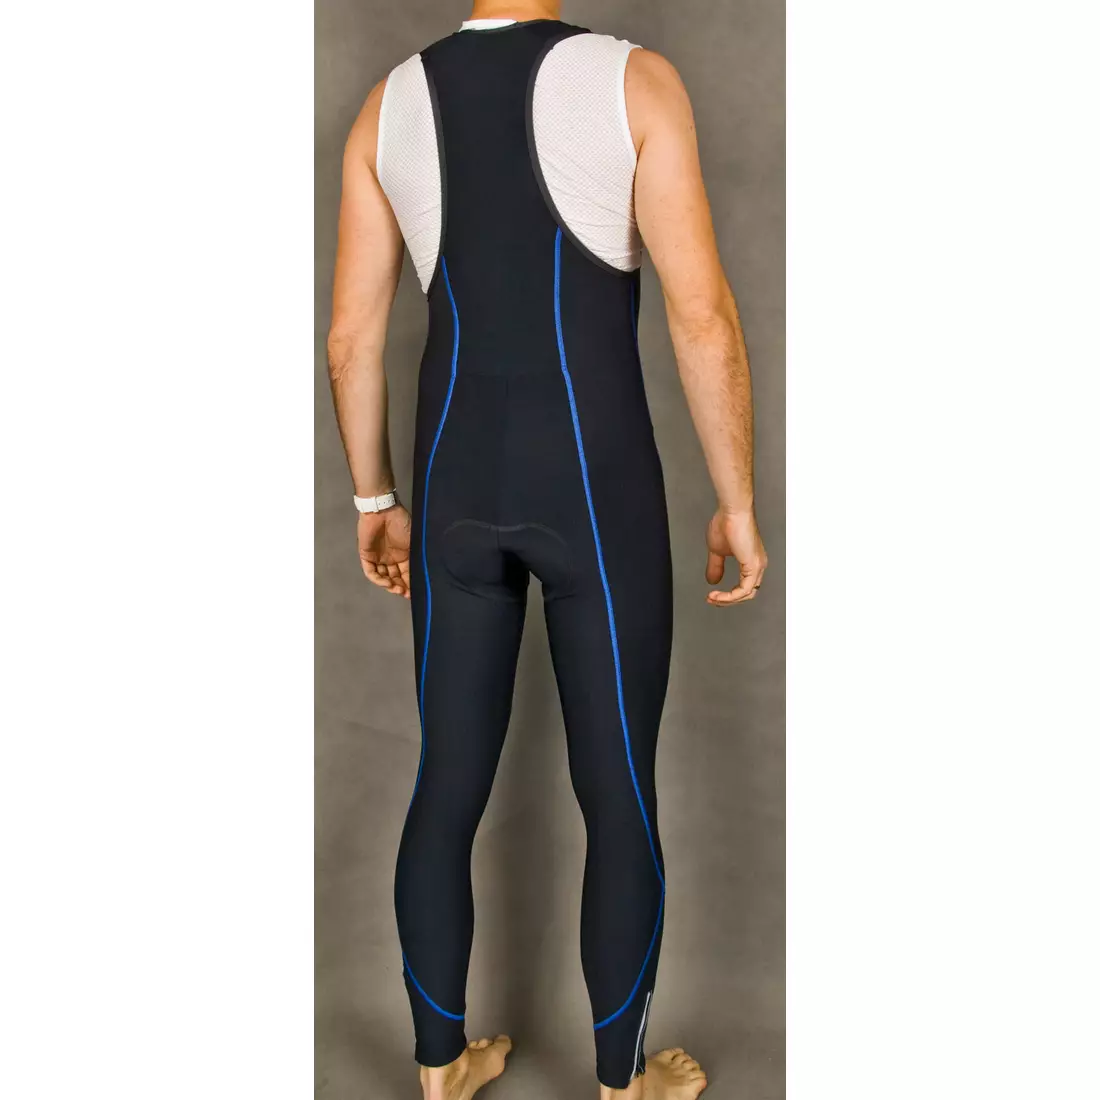 MikeSPORT GEXO insulated cycling pants with COMP HP insert, bib, black and blue seams